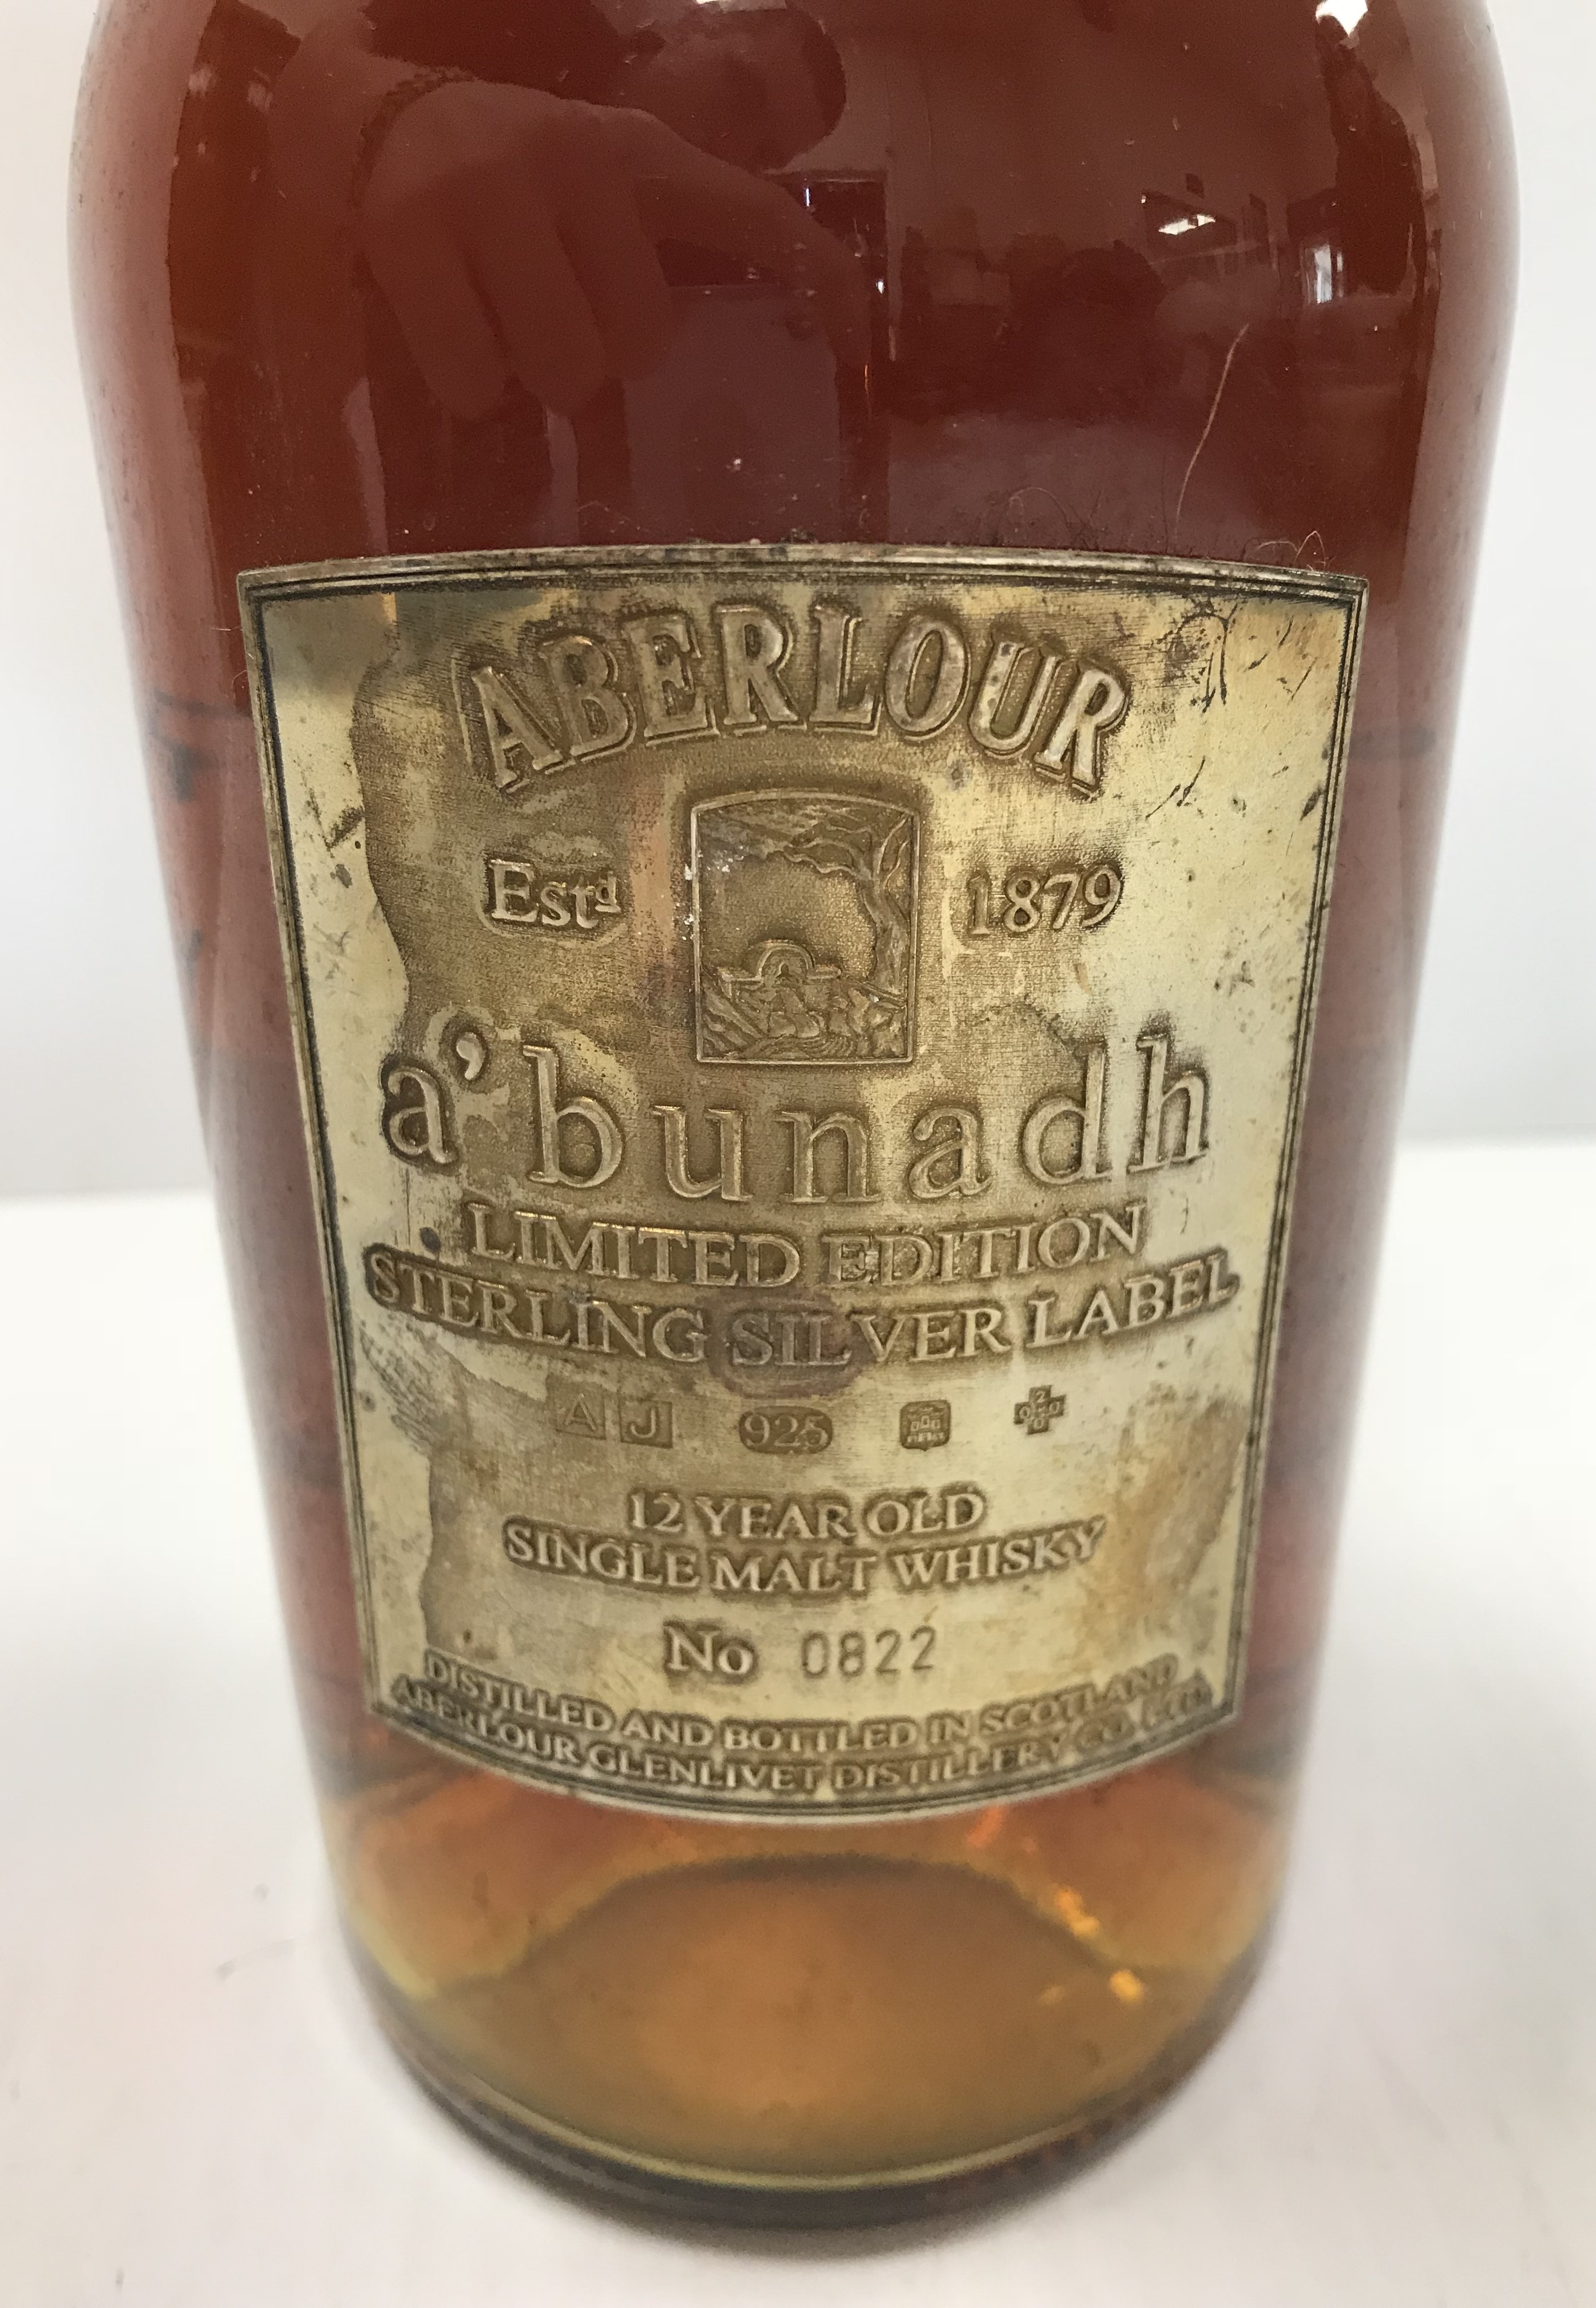 One bottle Aberlour A'bunadh limited edition sterling silver label twelve year old single malt - Image 2 of 2